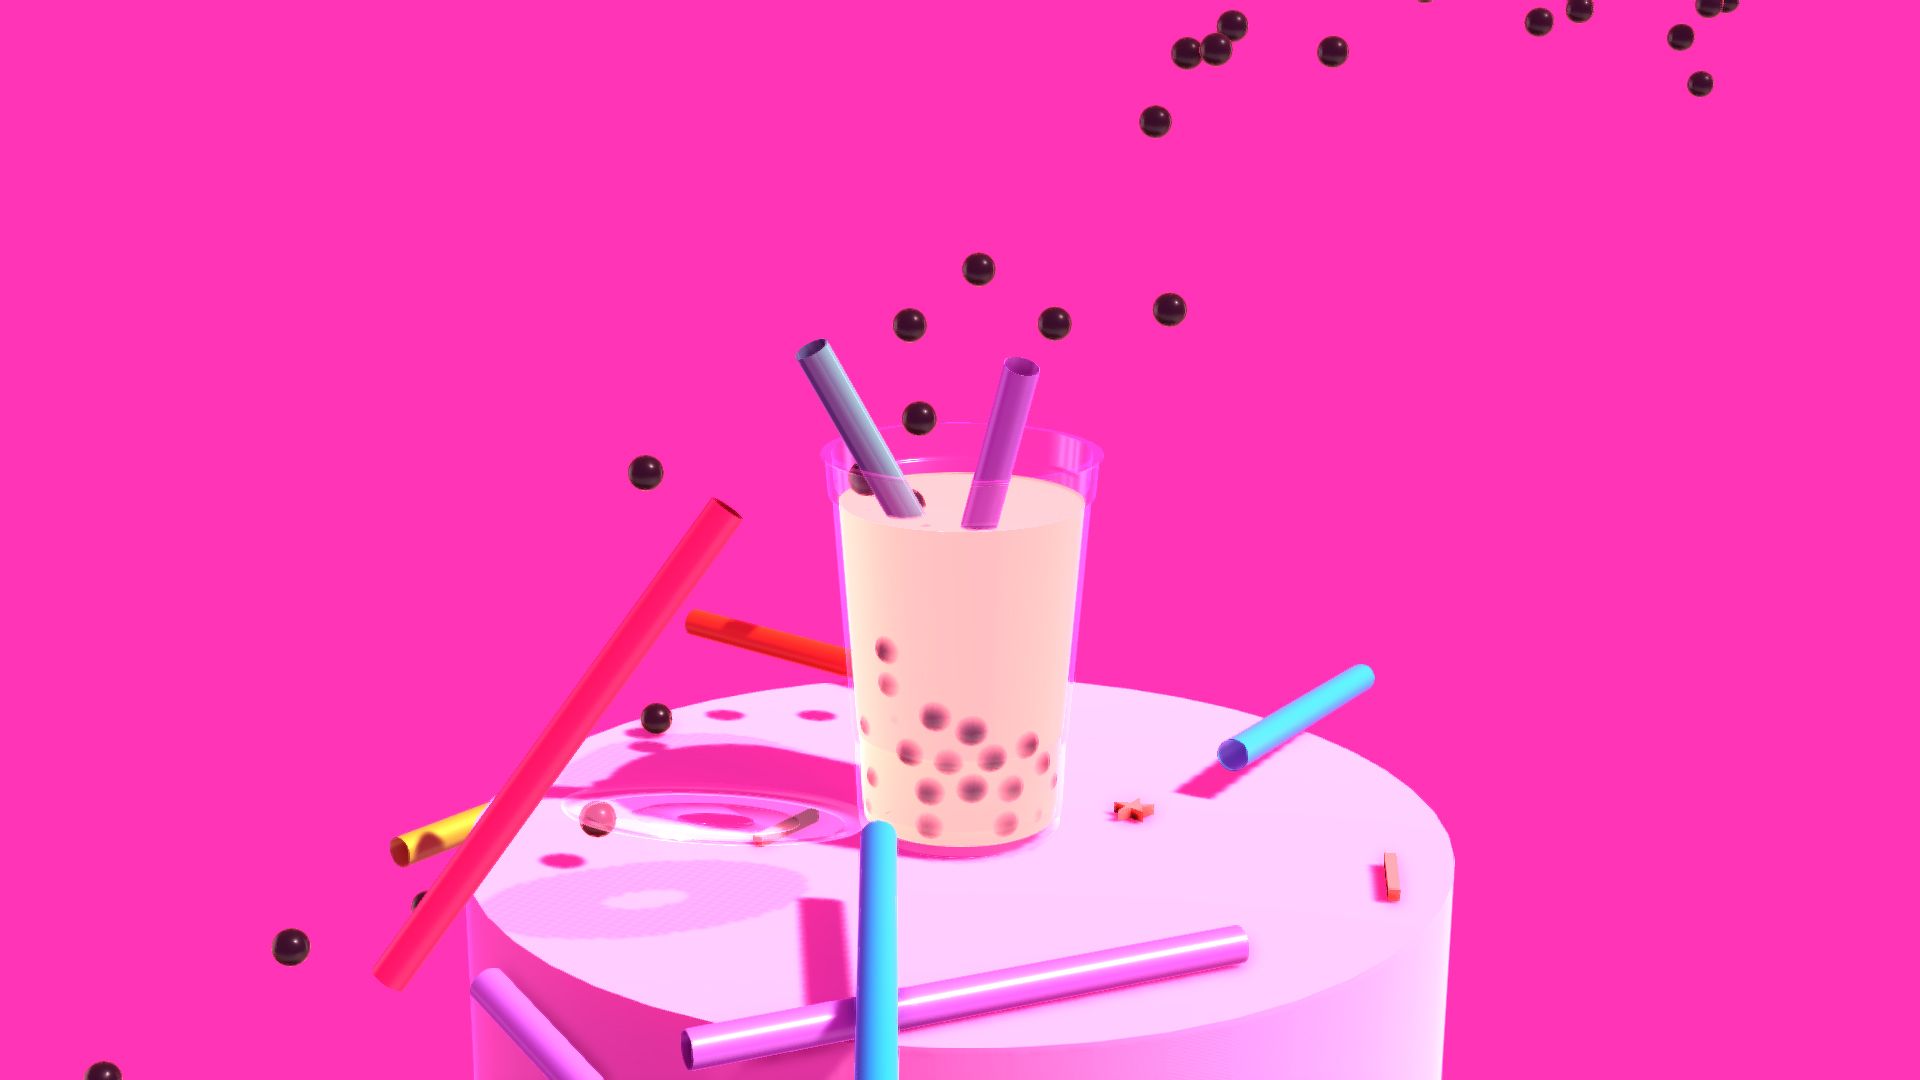 Anime and bubble tea inspired this food physics sim